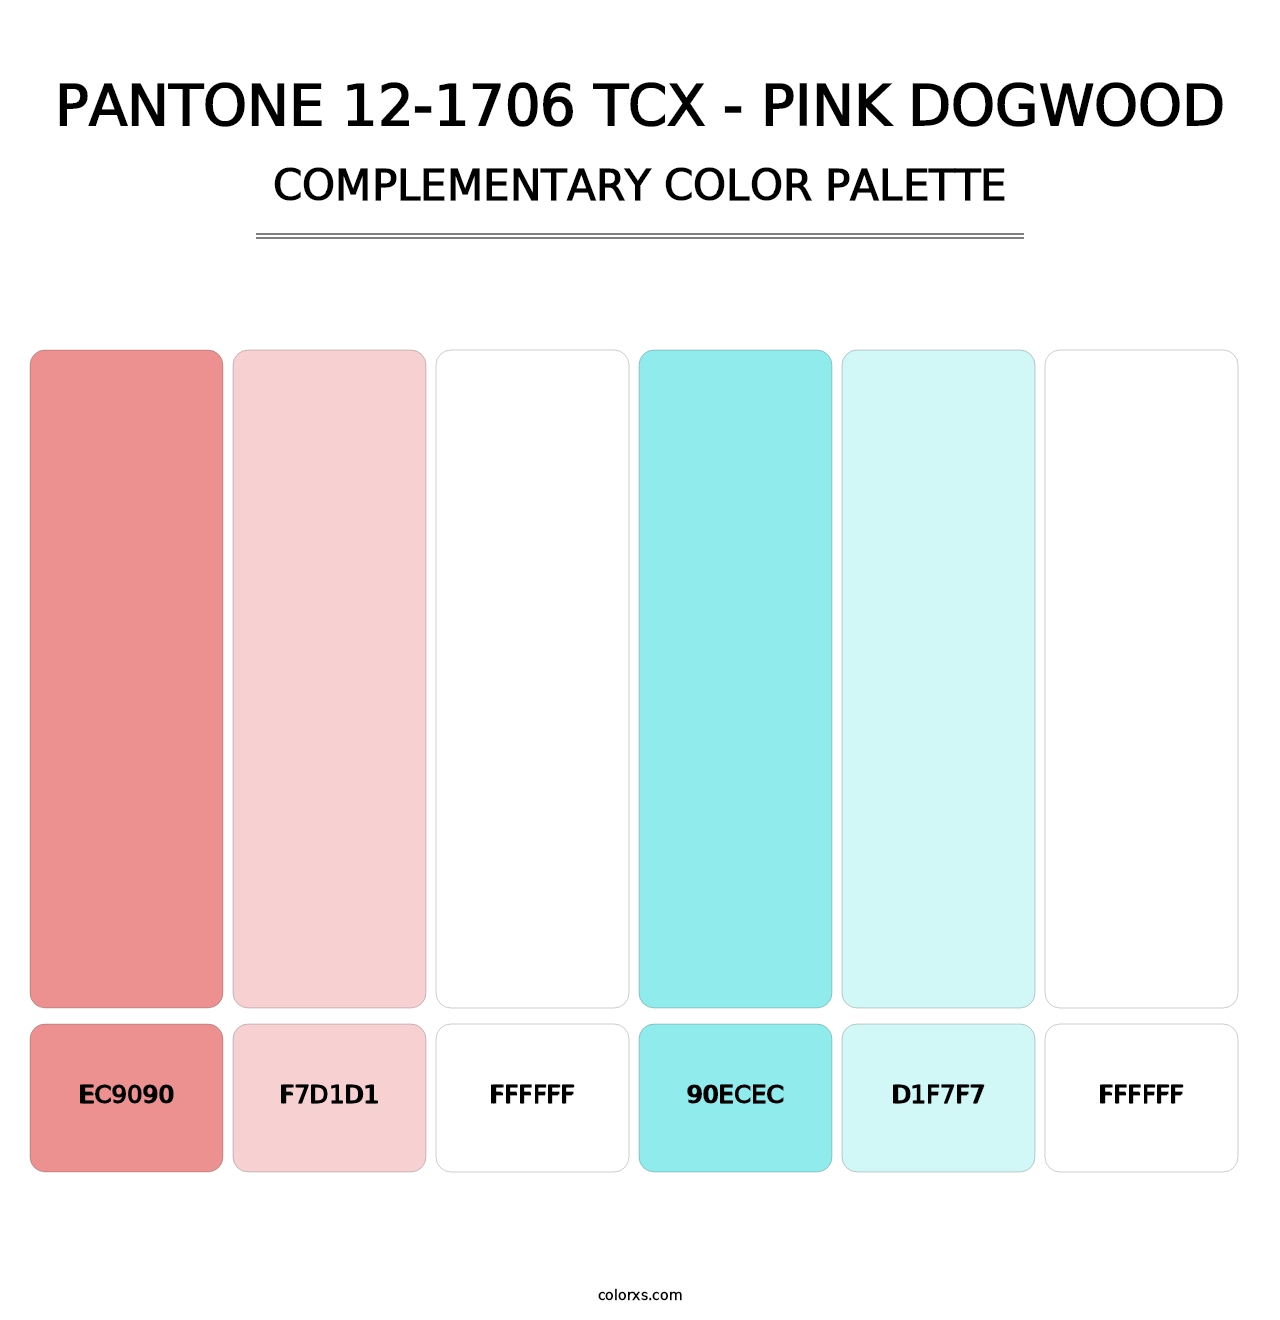 PANTONE 12-1706 TCX - Pink Dogwood - Complementary Color Palette